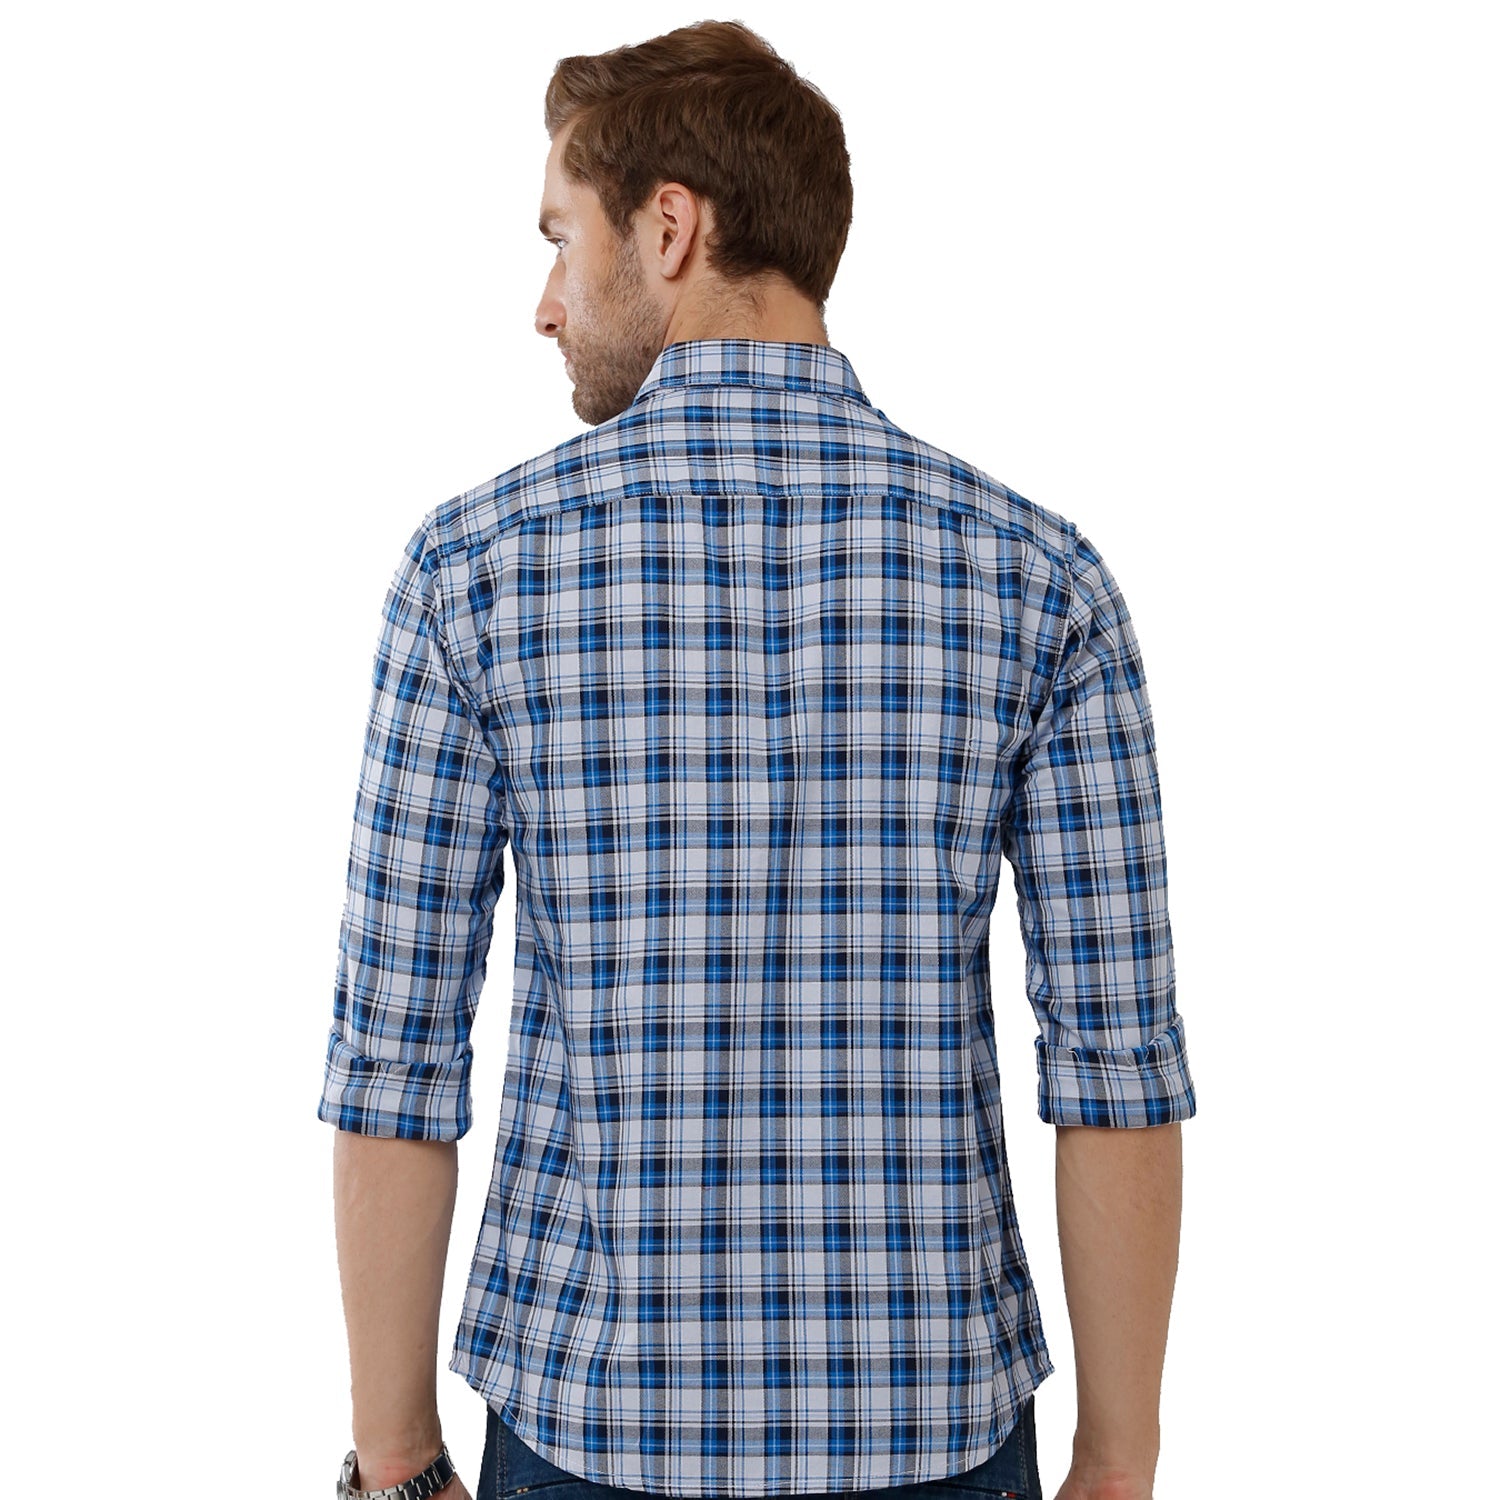 Classic Polo Mens 100% Cotton Full Sleeve Checked Slim Fit Blue Woven Shirt -SN1 116 A Shirts Classic Polo 